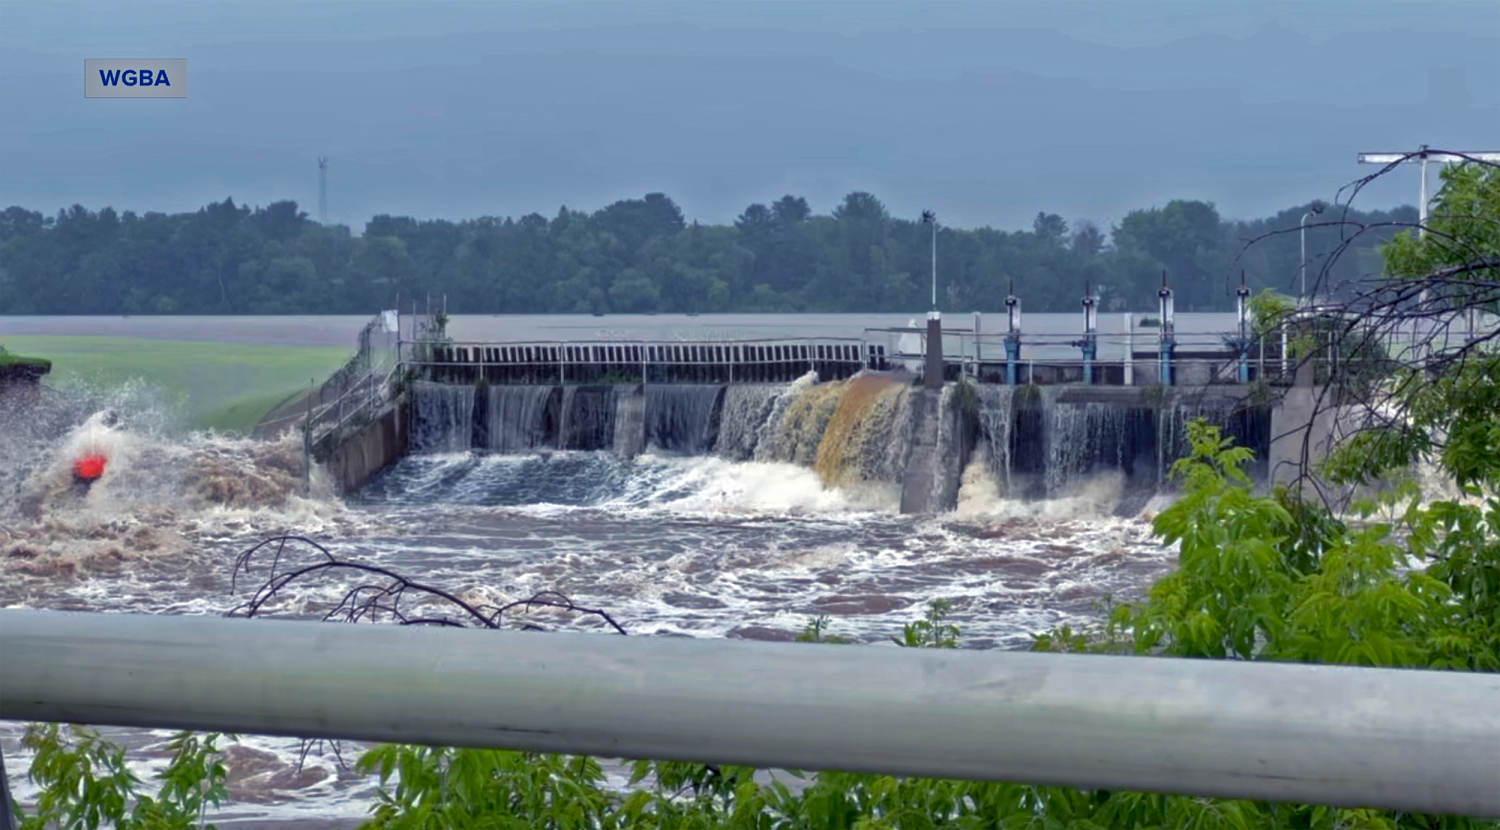 Residents allowed to return home after Wisconsin dam breach led to evacuation